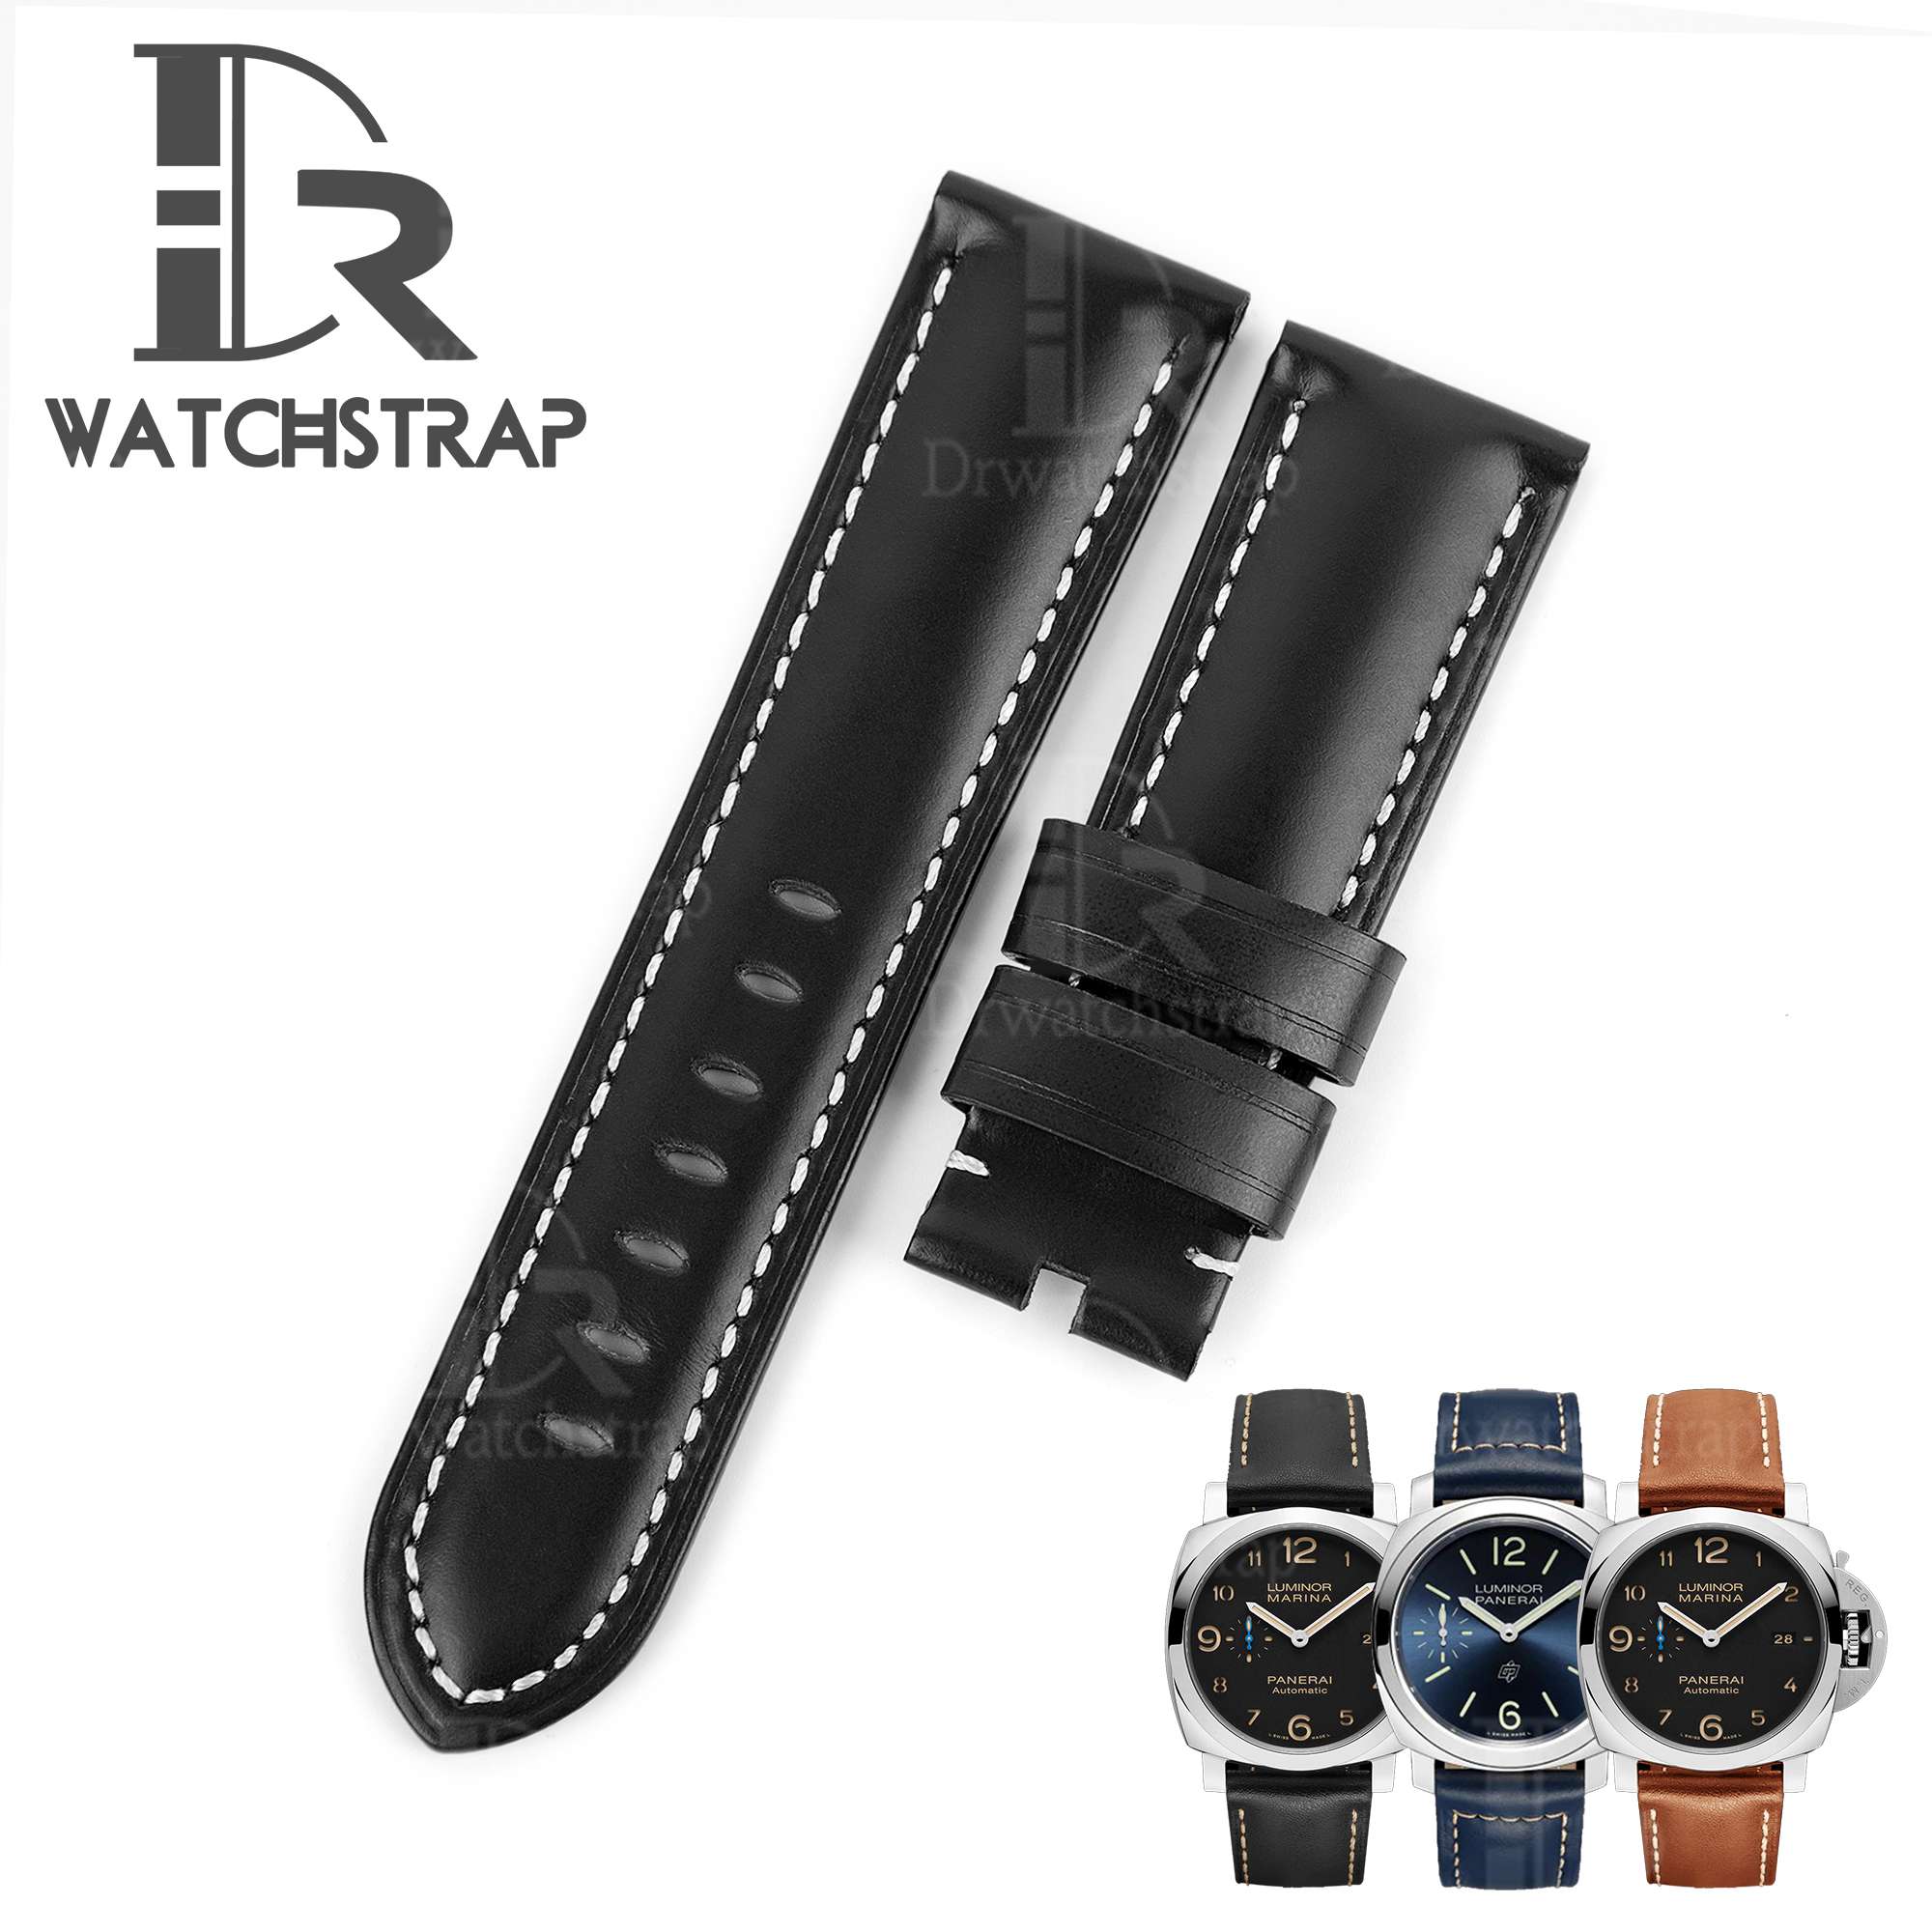 Premium aftermarket best OEM handmade Black Panerai calfskin leather Strap and watch band replacement 22mm 24mm for Panerai Luminor Due luxury watches from dr watchstrap for sale - Shop the premium calf leather material wholesale straps and watchbands online at a low price